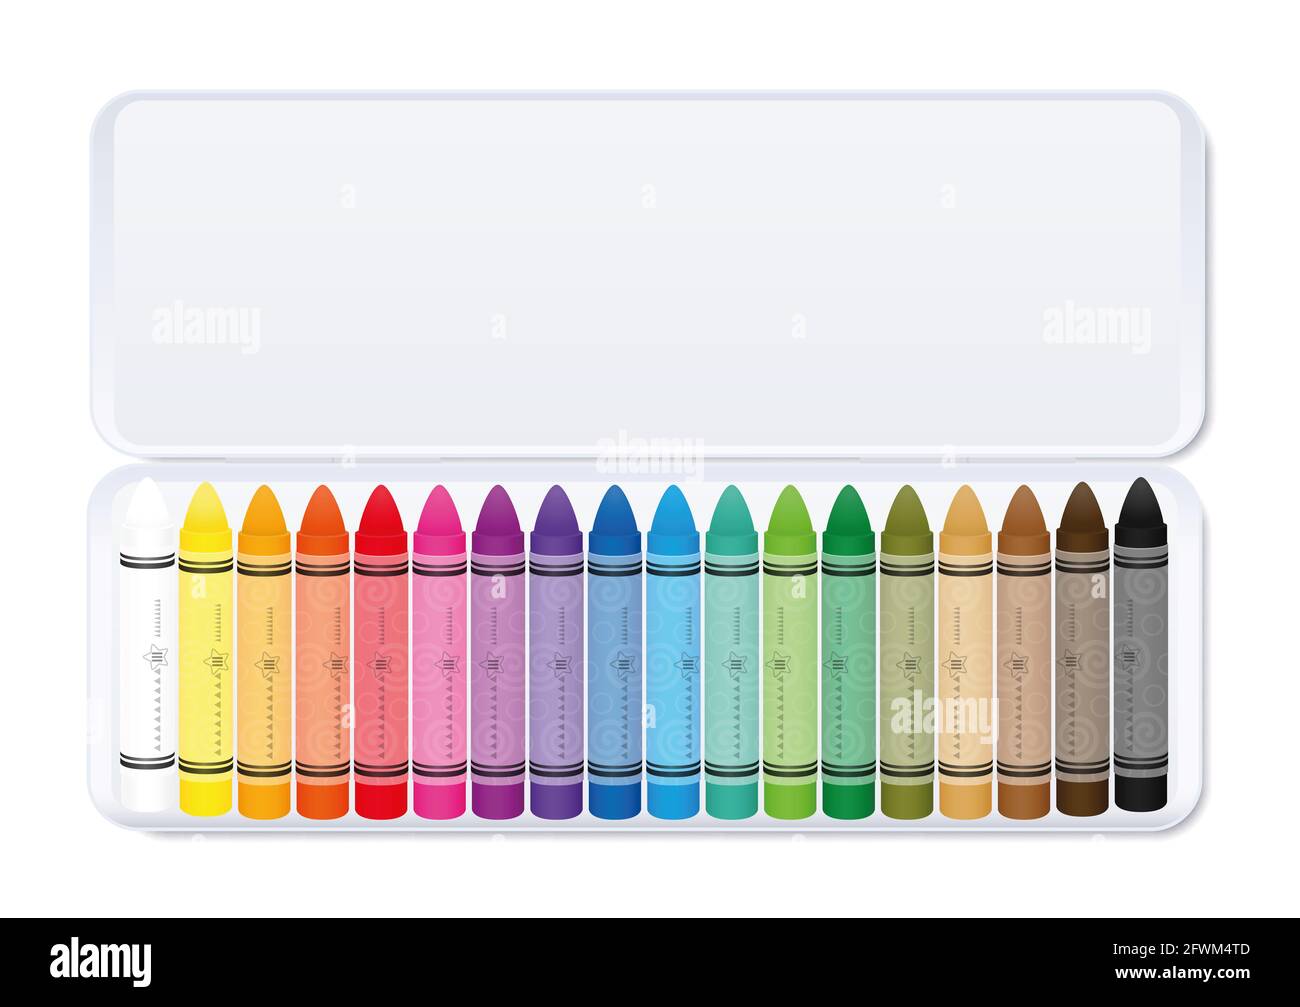 Wax pastel crayons, colorful set in a white metal box sorted by color - illustration on white background. Stock Photo